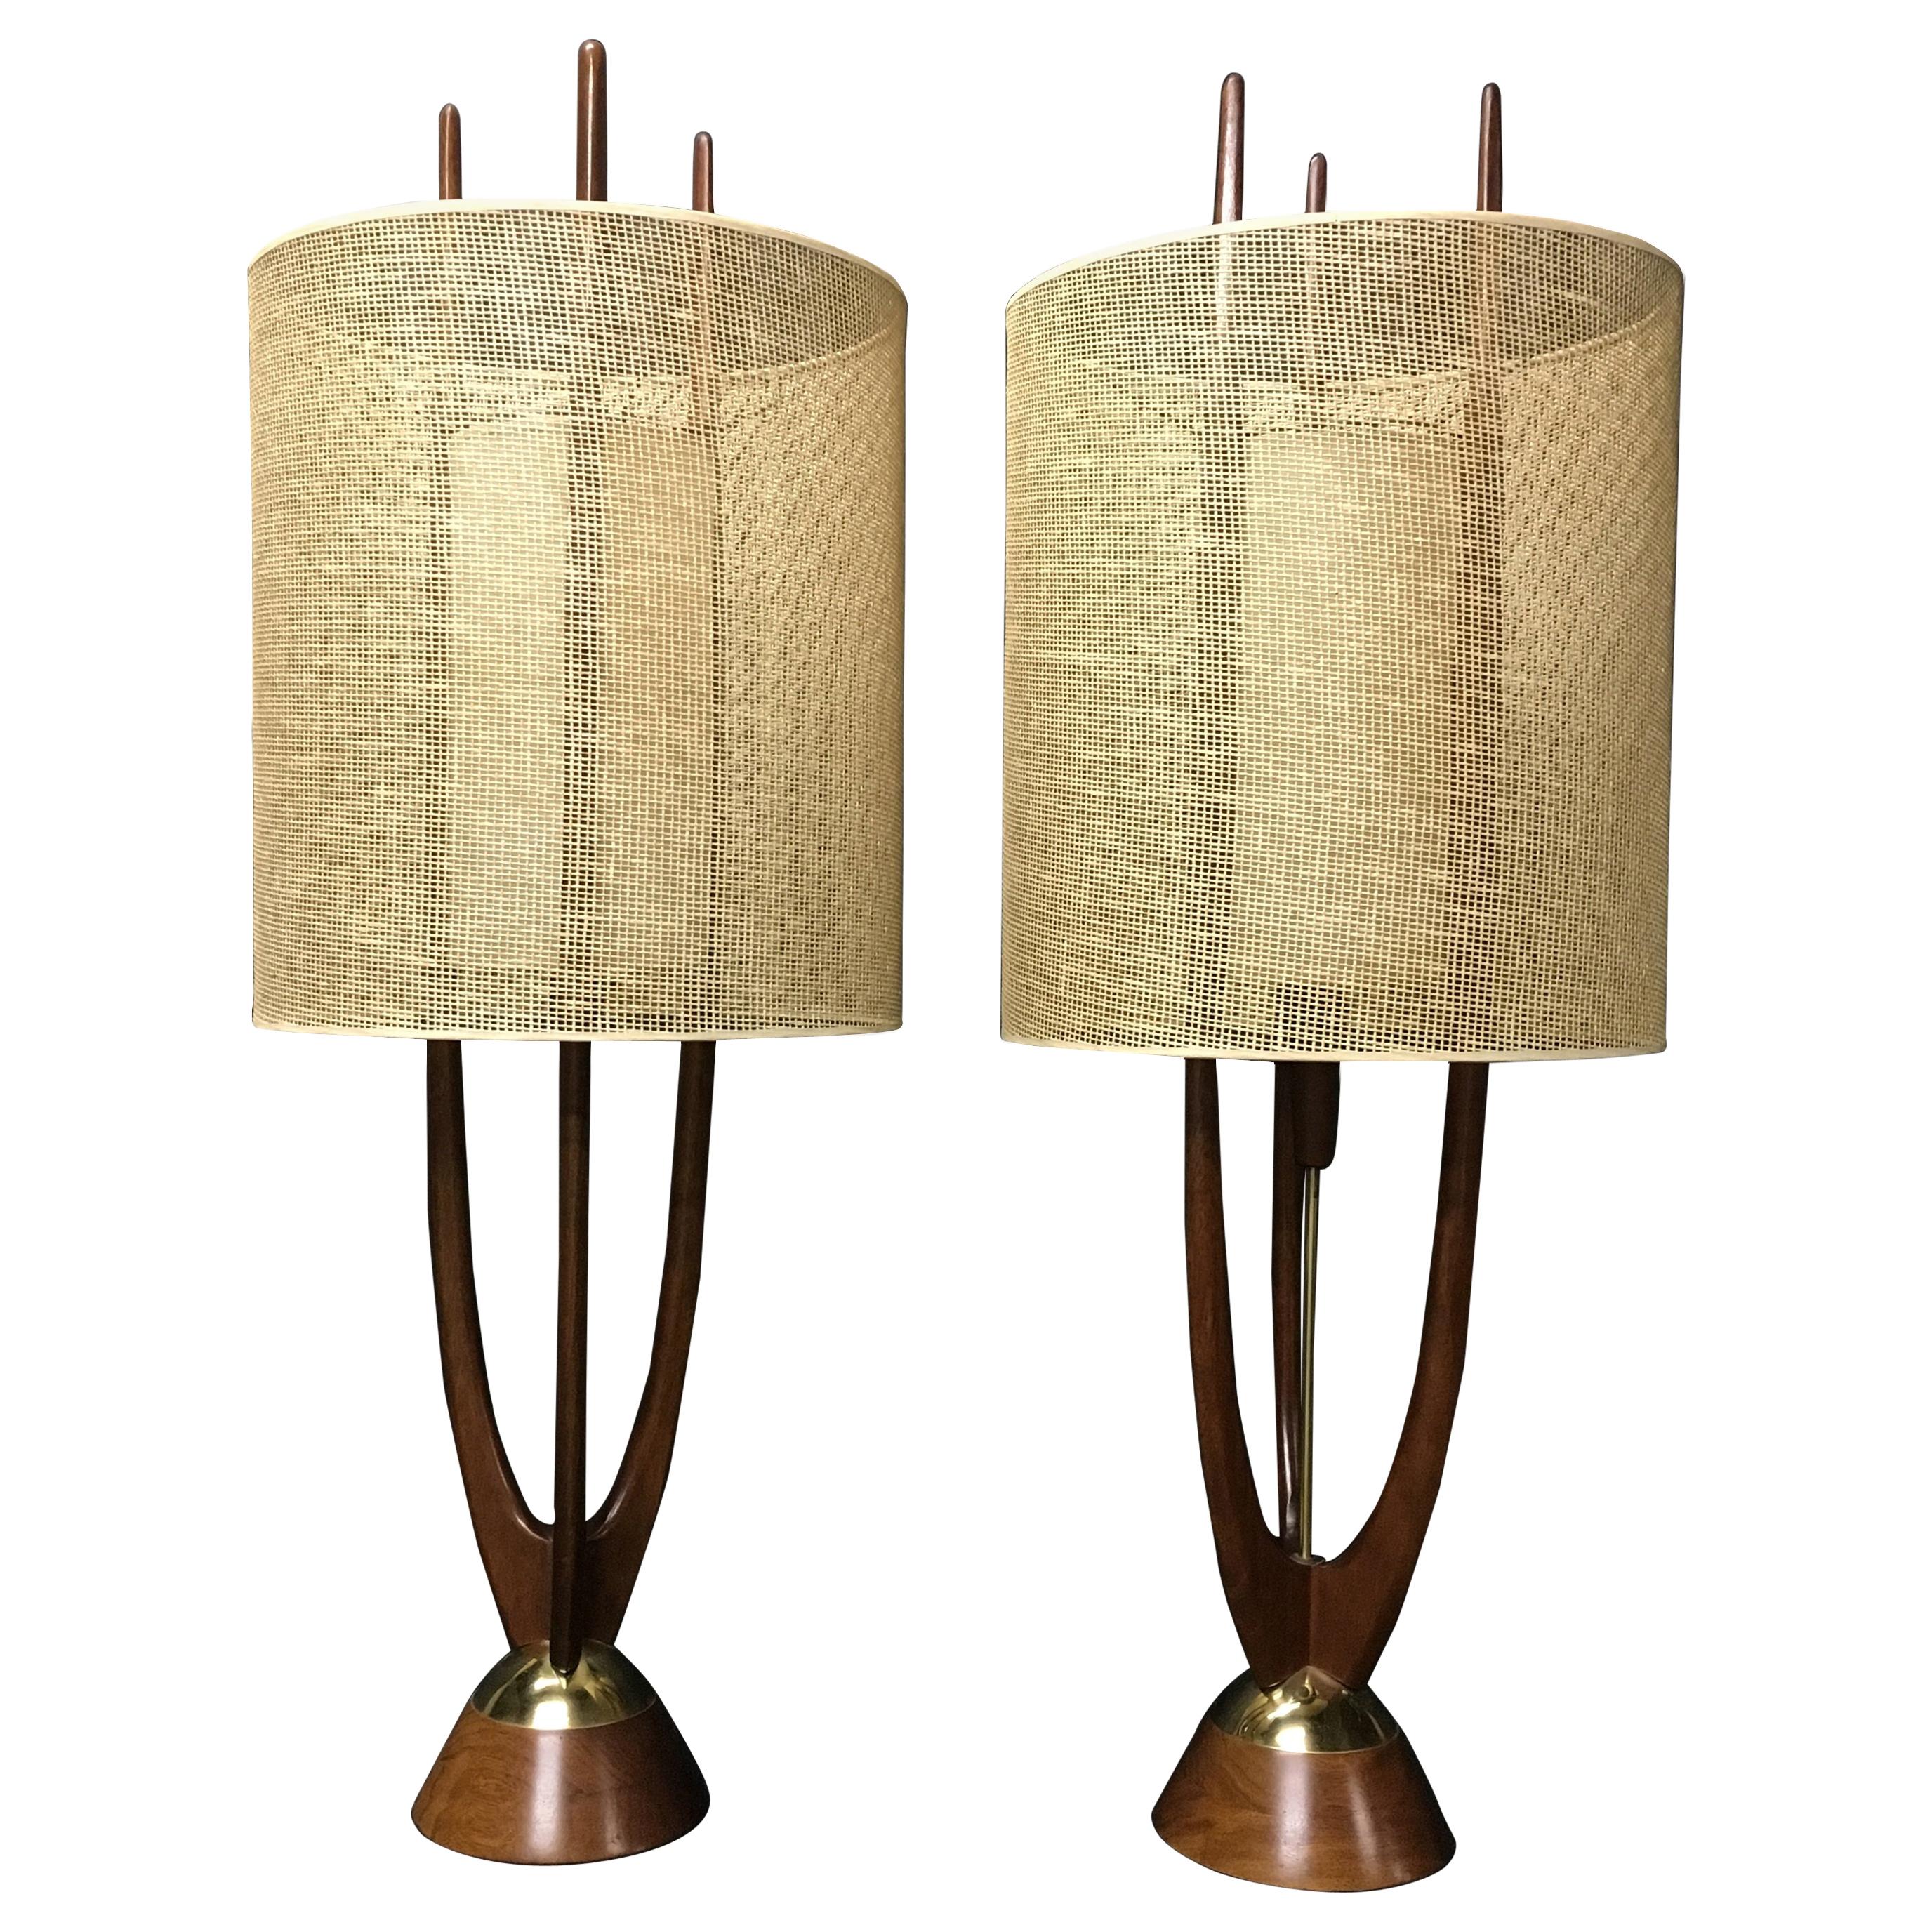 Exquisite Pair of Lamps by Modeline